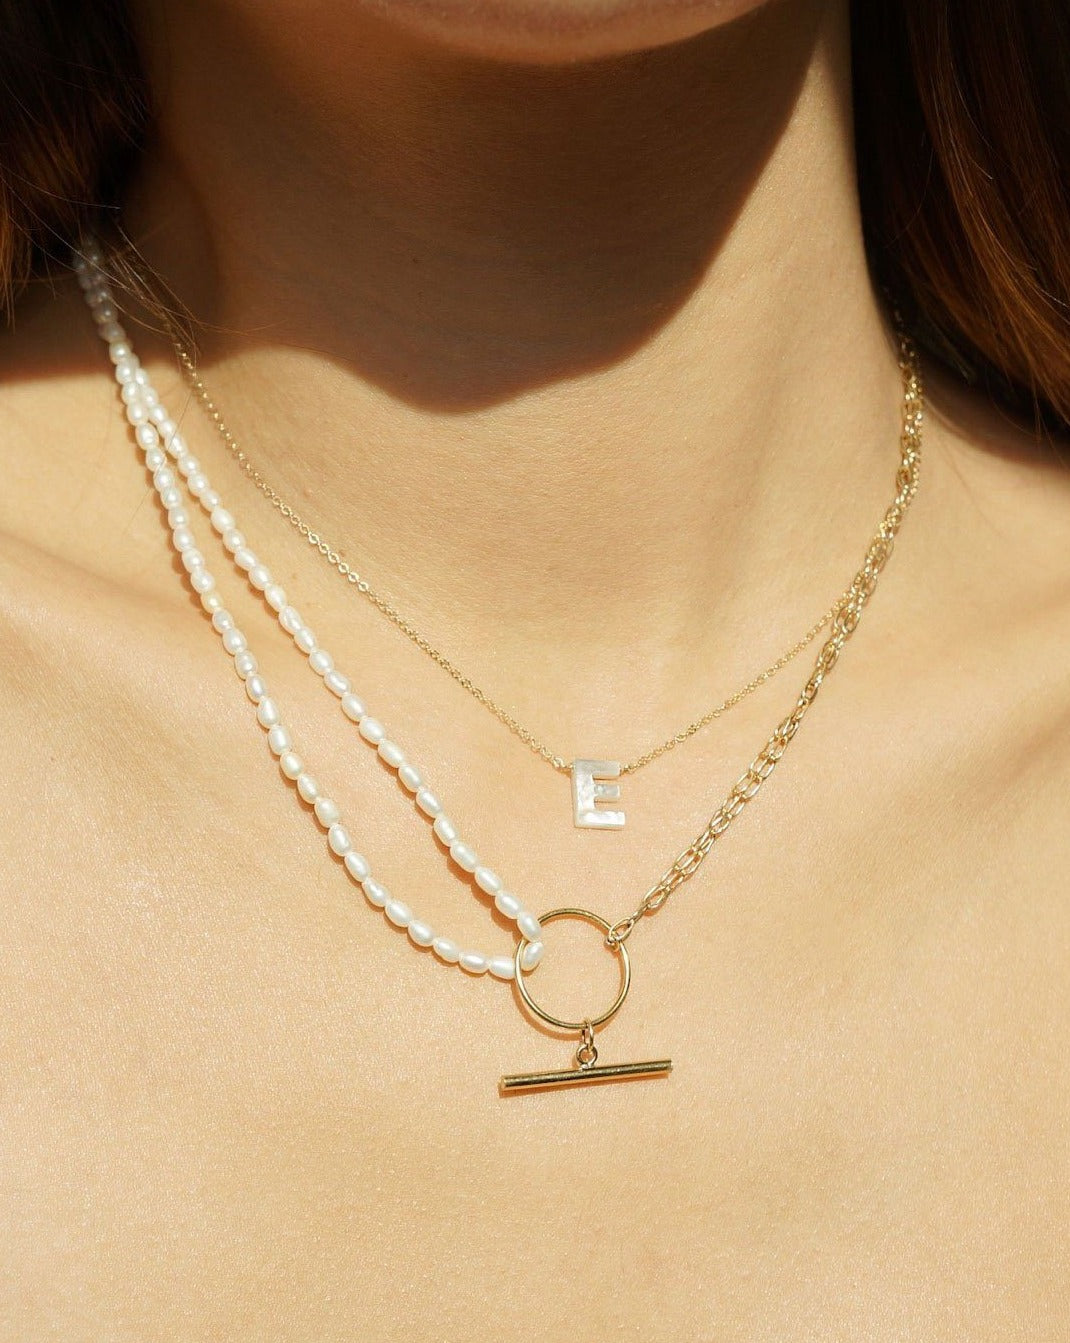 Trillian Necklace by KOZAKH. A 16 to 18 inch adjustable length necklace, with 4mm white pearl strand on one half, the other half is crafted in 14K Gold Filled, featuring a horizontal bar.